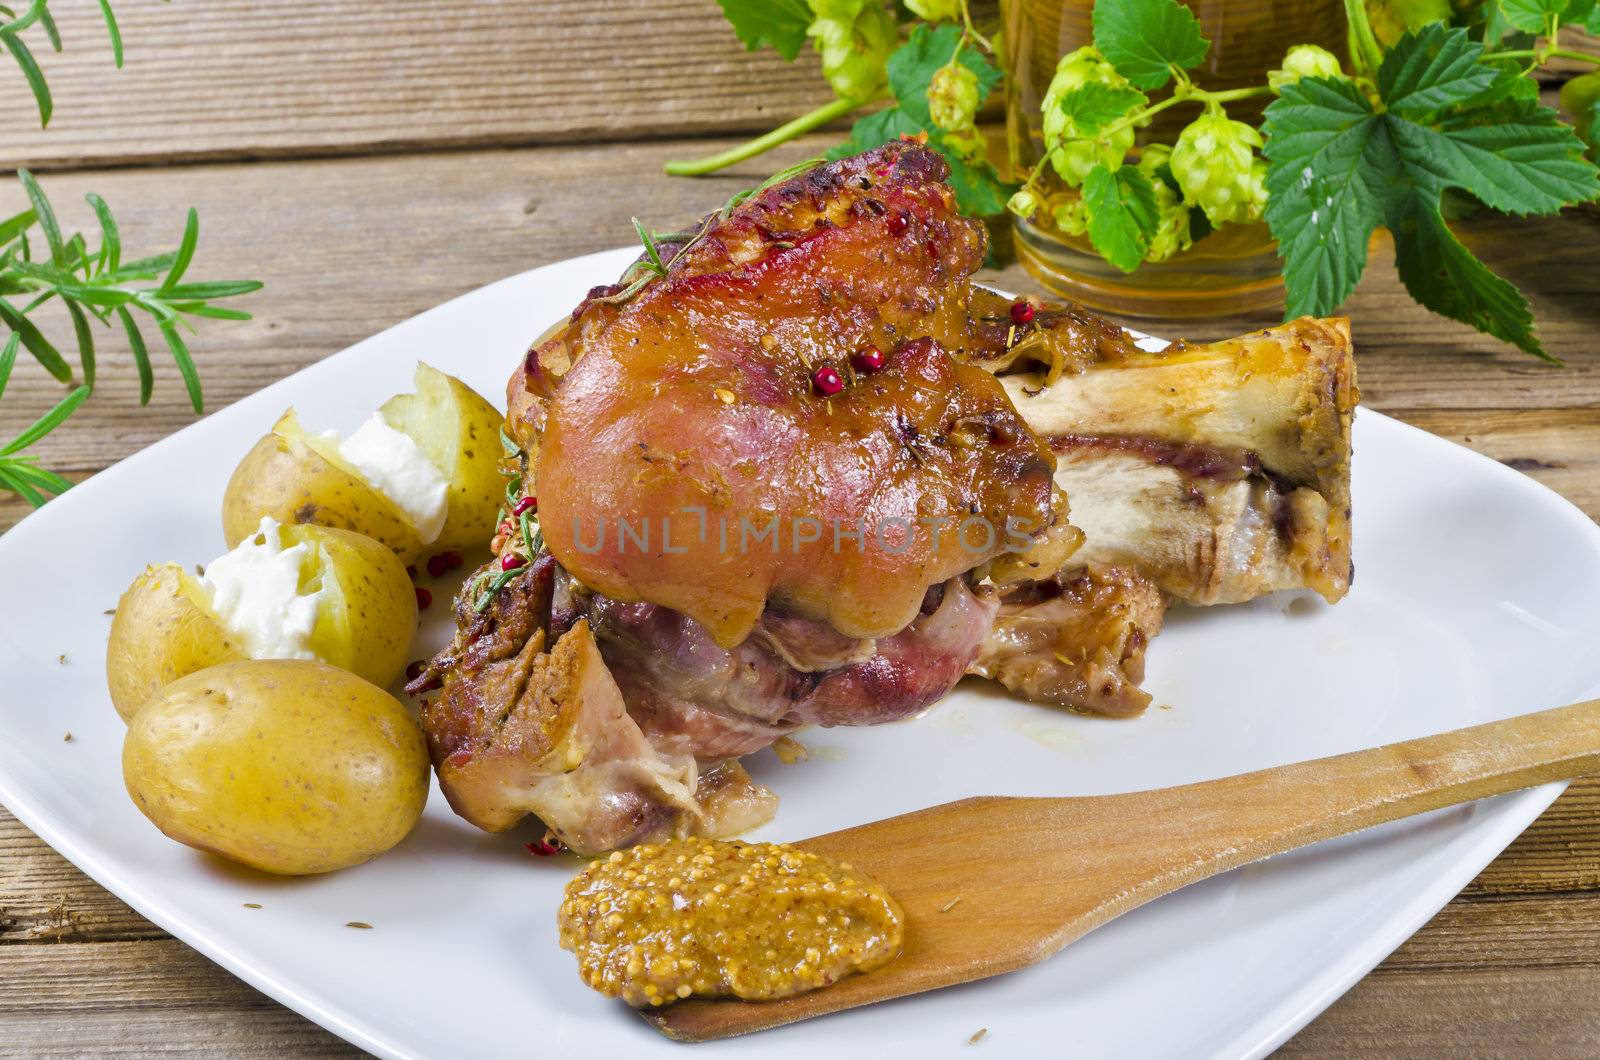 Roasted pork knuckle. Ham and bacon are popular foods in the west, and their consumption has increased with industrialisation.